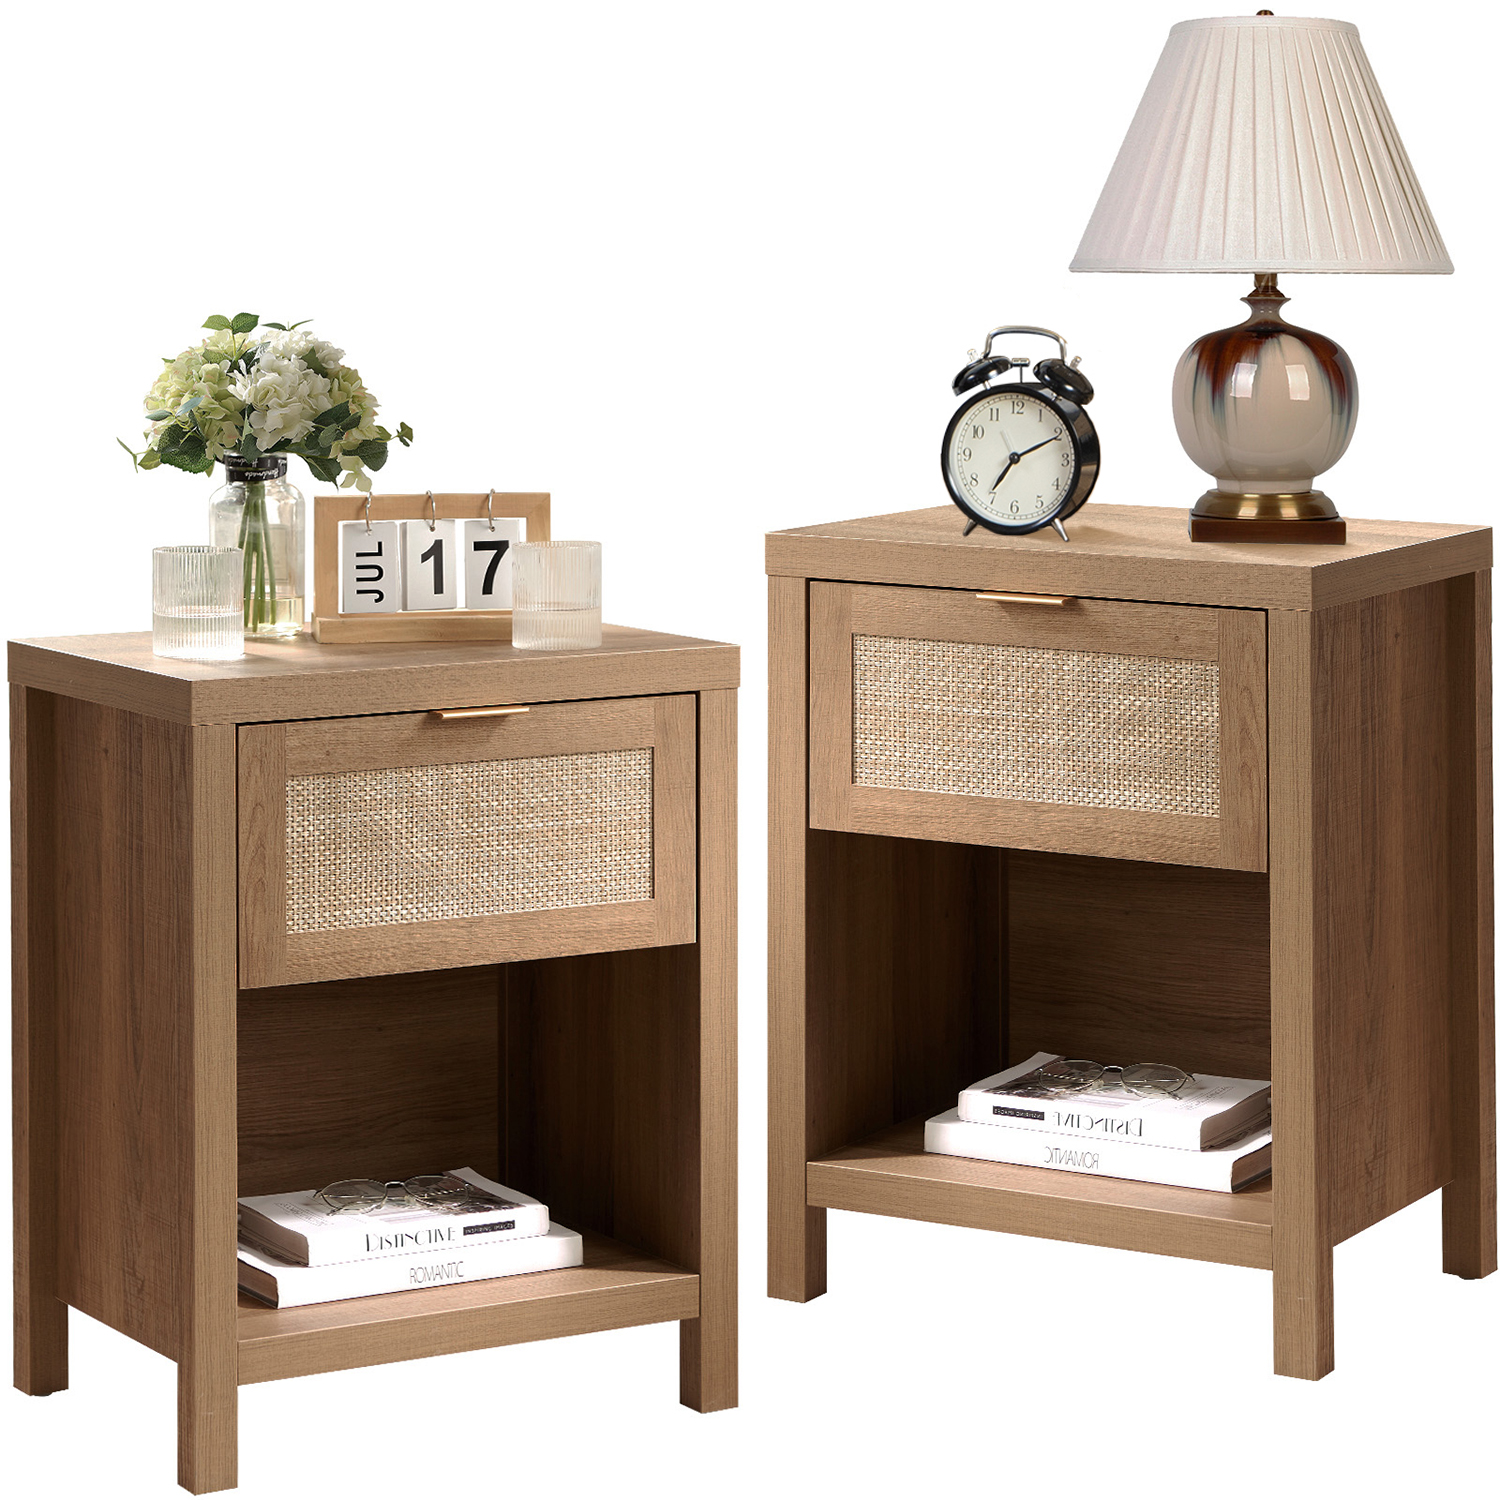 Surmoby Rattan Nightstand Set of 2,Farmhouse Bedside Tables Night Stands with Drawer and Storage Shelf,Boho Side Tables for Living Room,Bedroom,Oak - image 1 of 10